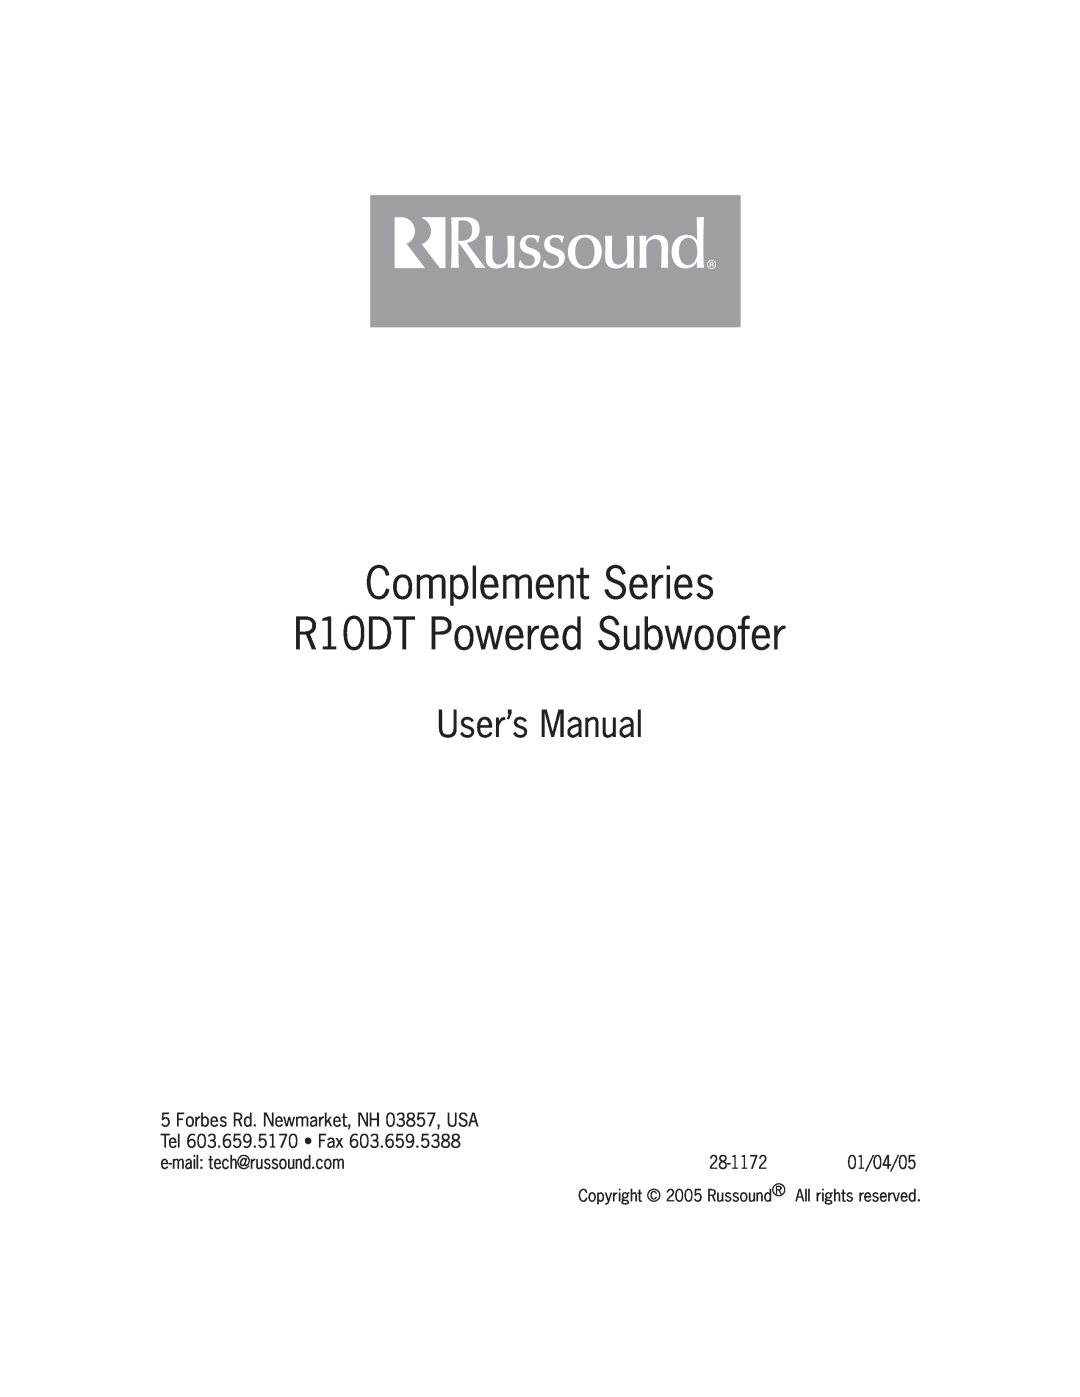 Russound Complement Series R10DT Powered Subwoofer, Forbes Rd. Newmarket, NH 03857, USA, Tel 603.659.5170 Fax, 28-1172 